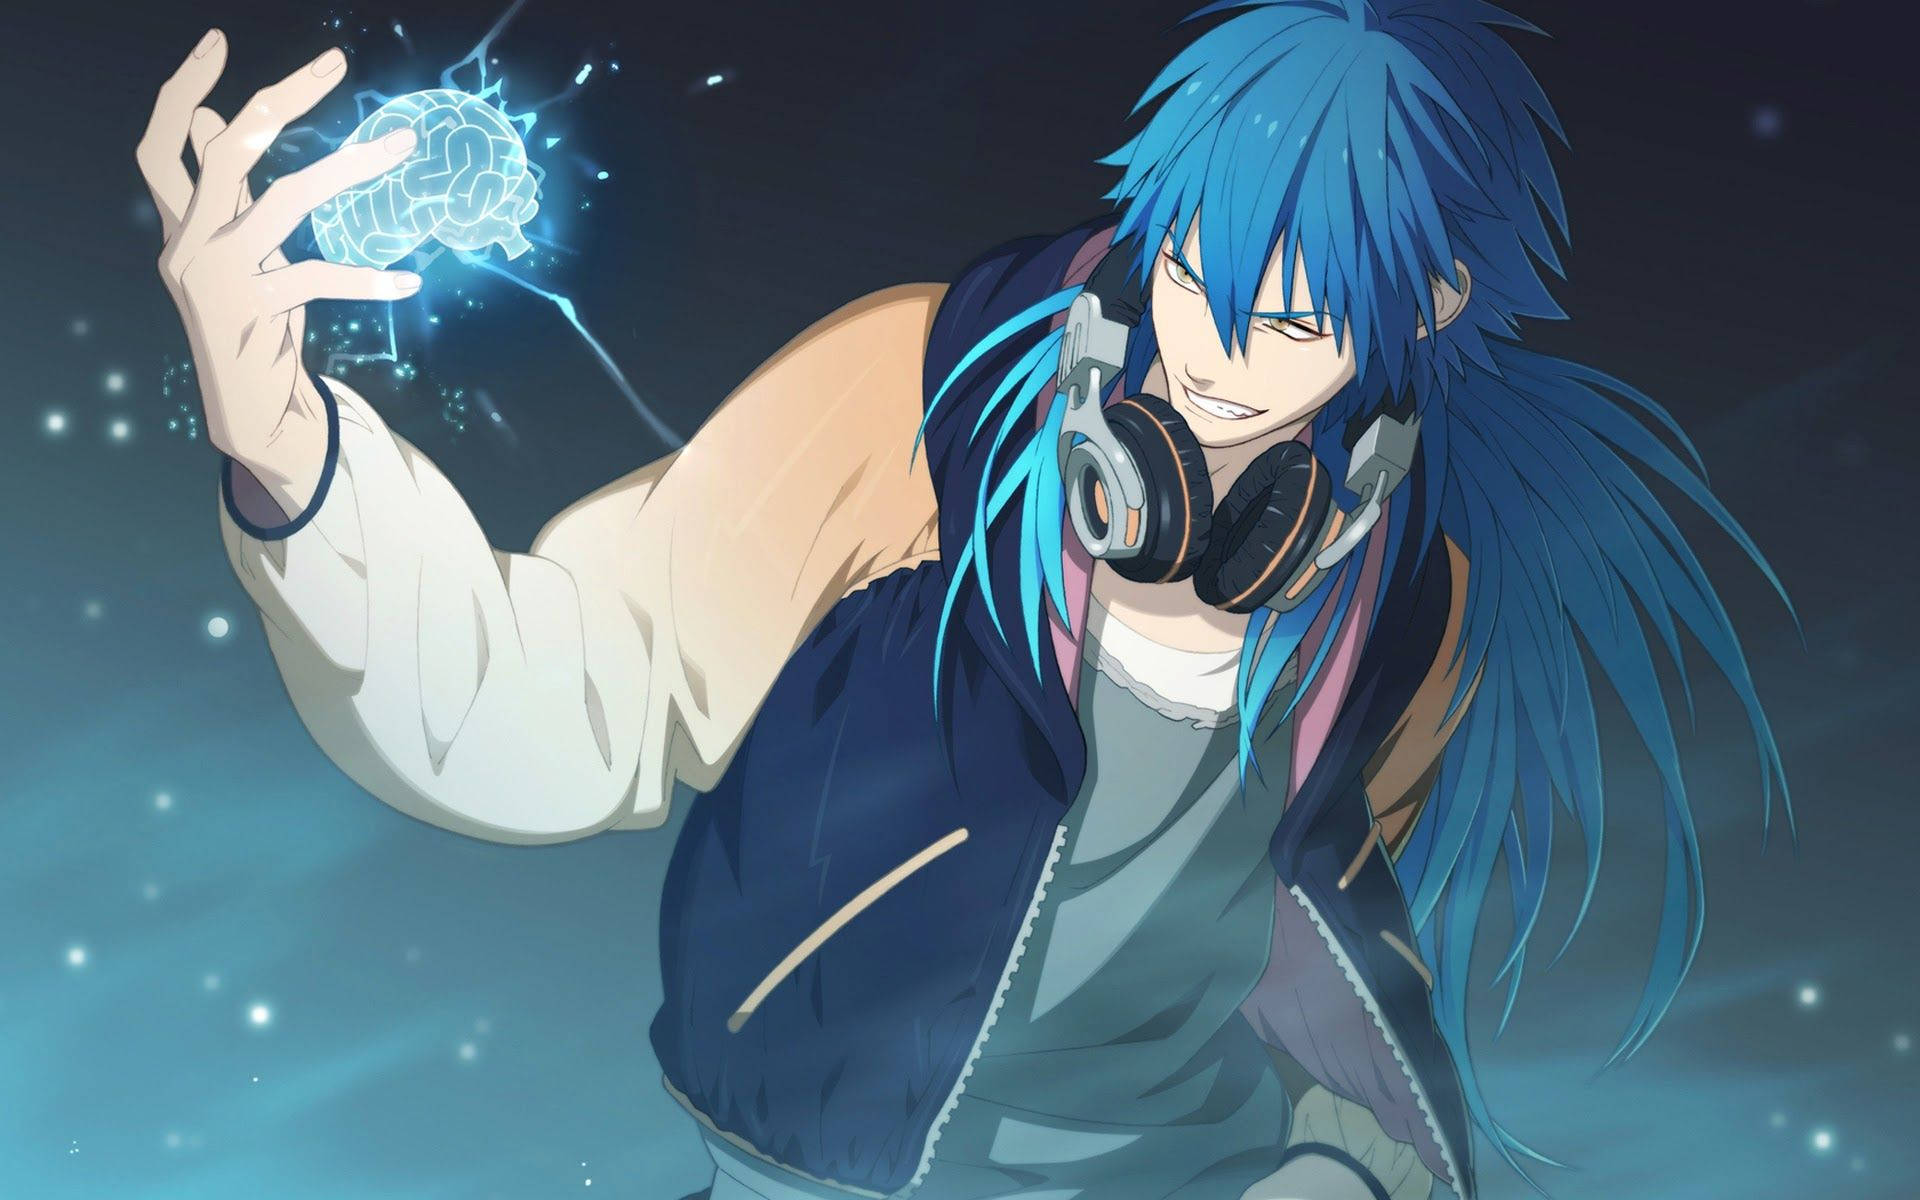 Aoba Seragaki – The Anime Protagonist From Cool Boy Anime Background